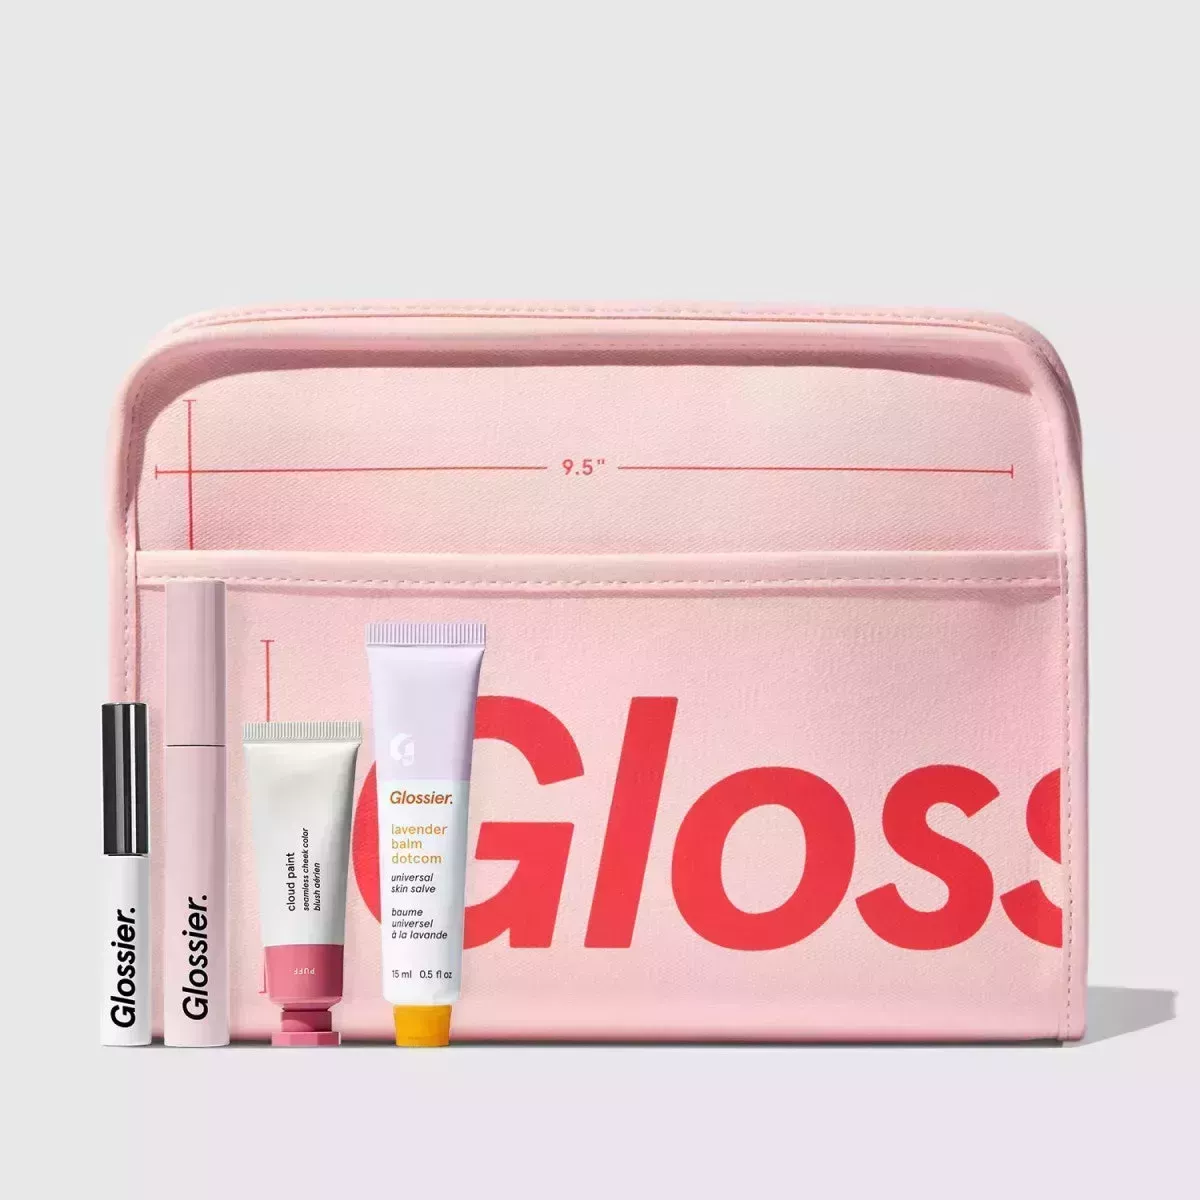 Glossier It’s All in the Bag Set on grey background